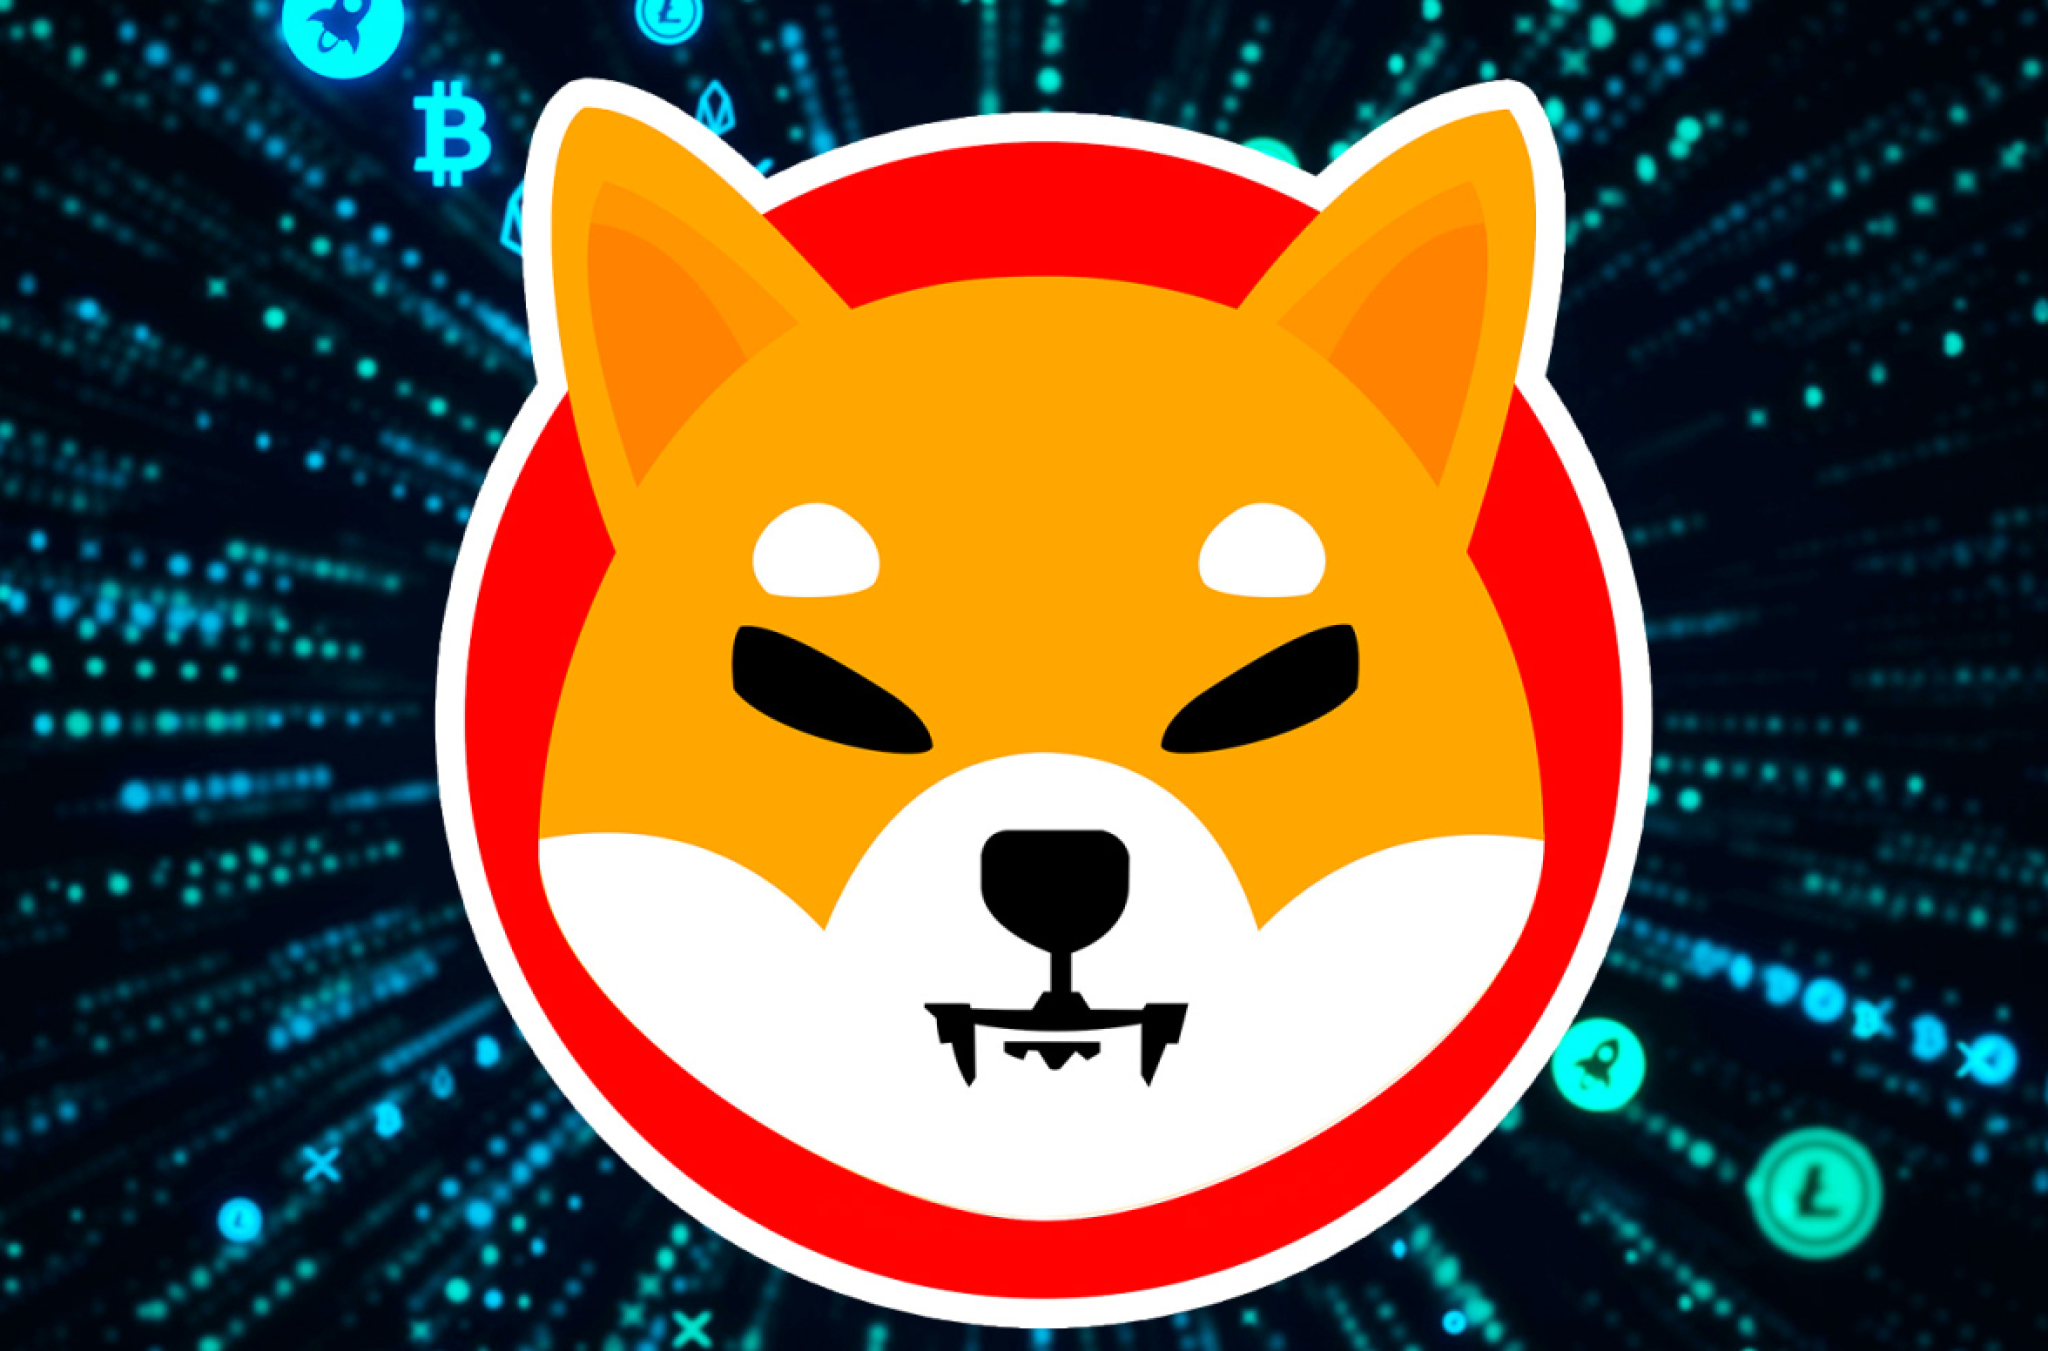 Stake shib on coinbase crypto coin offering